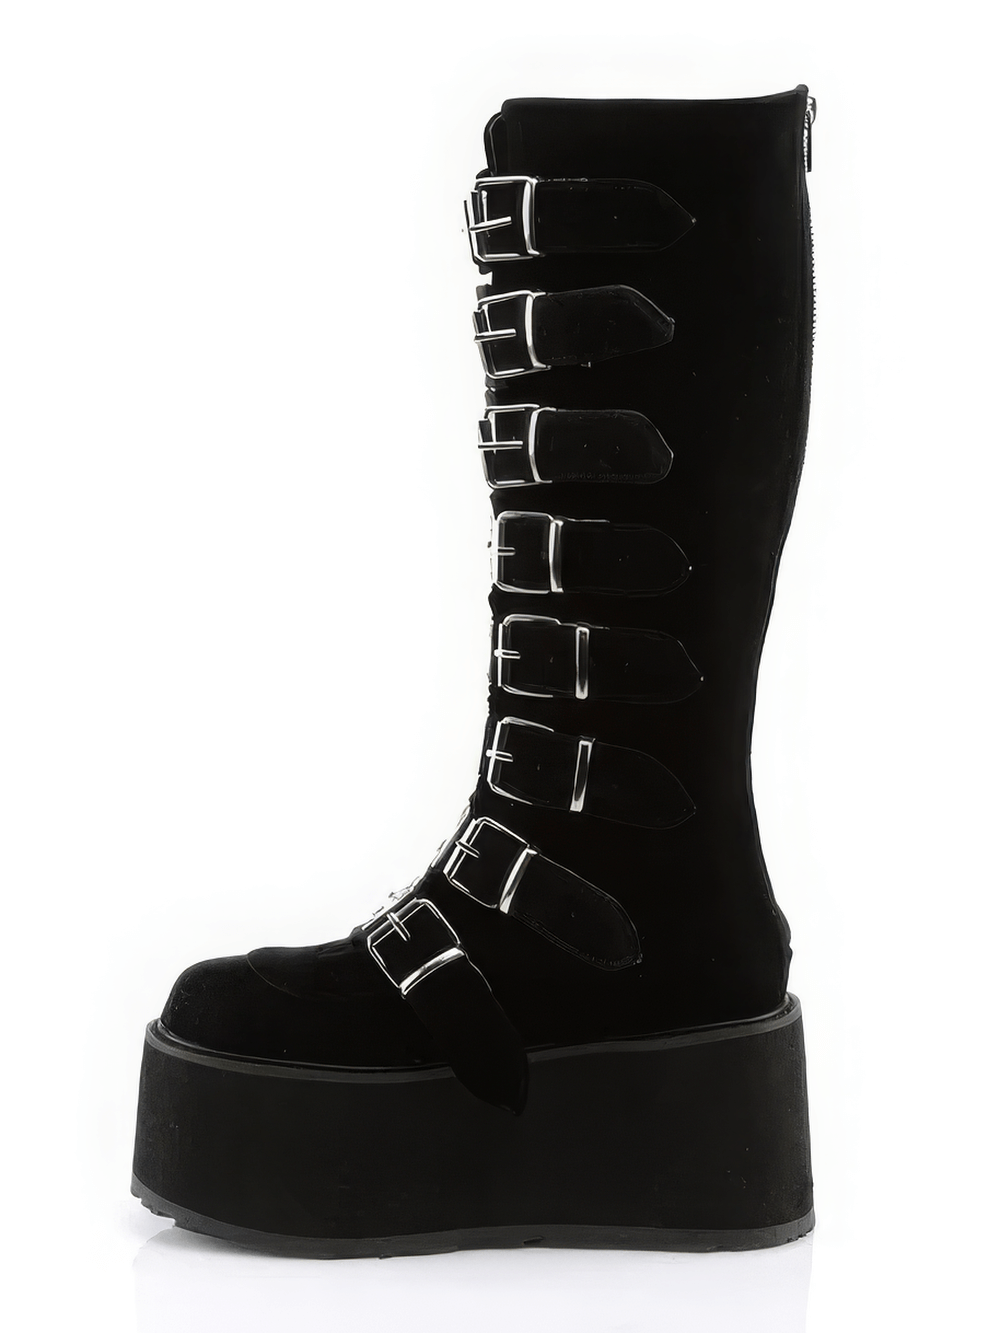 DEMONIA Black Knee High Boots with Buckles and Platform